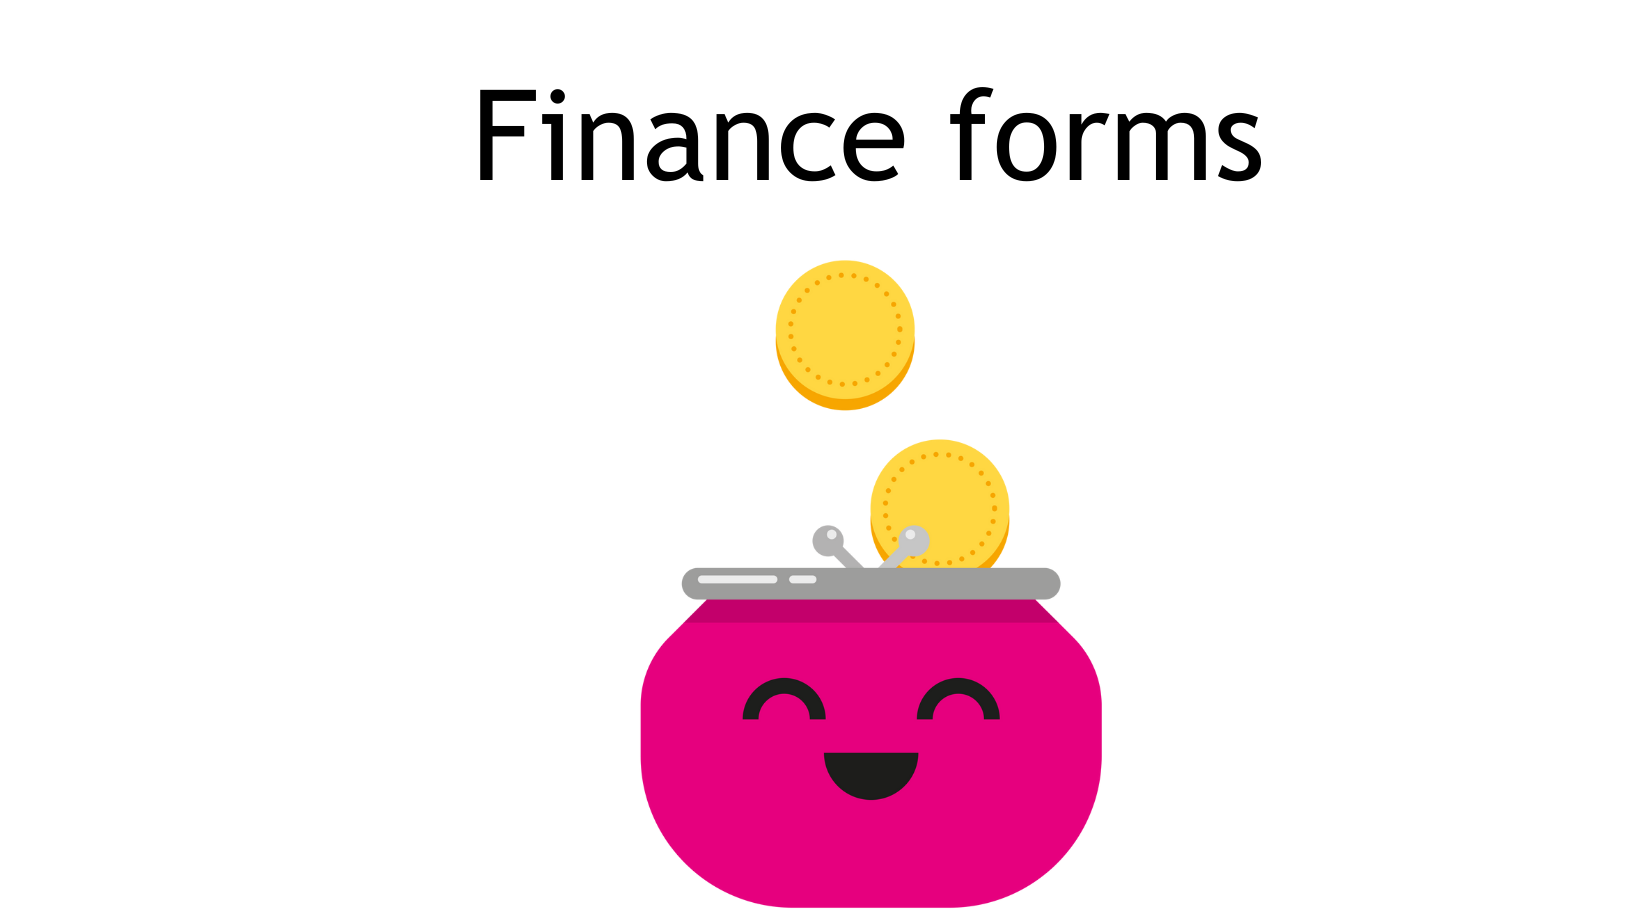 Finance forms